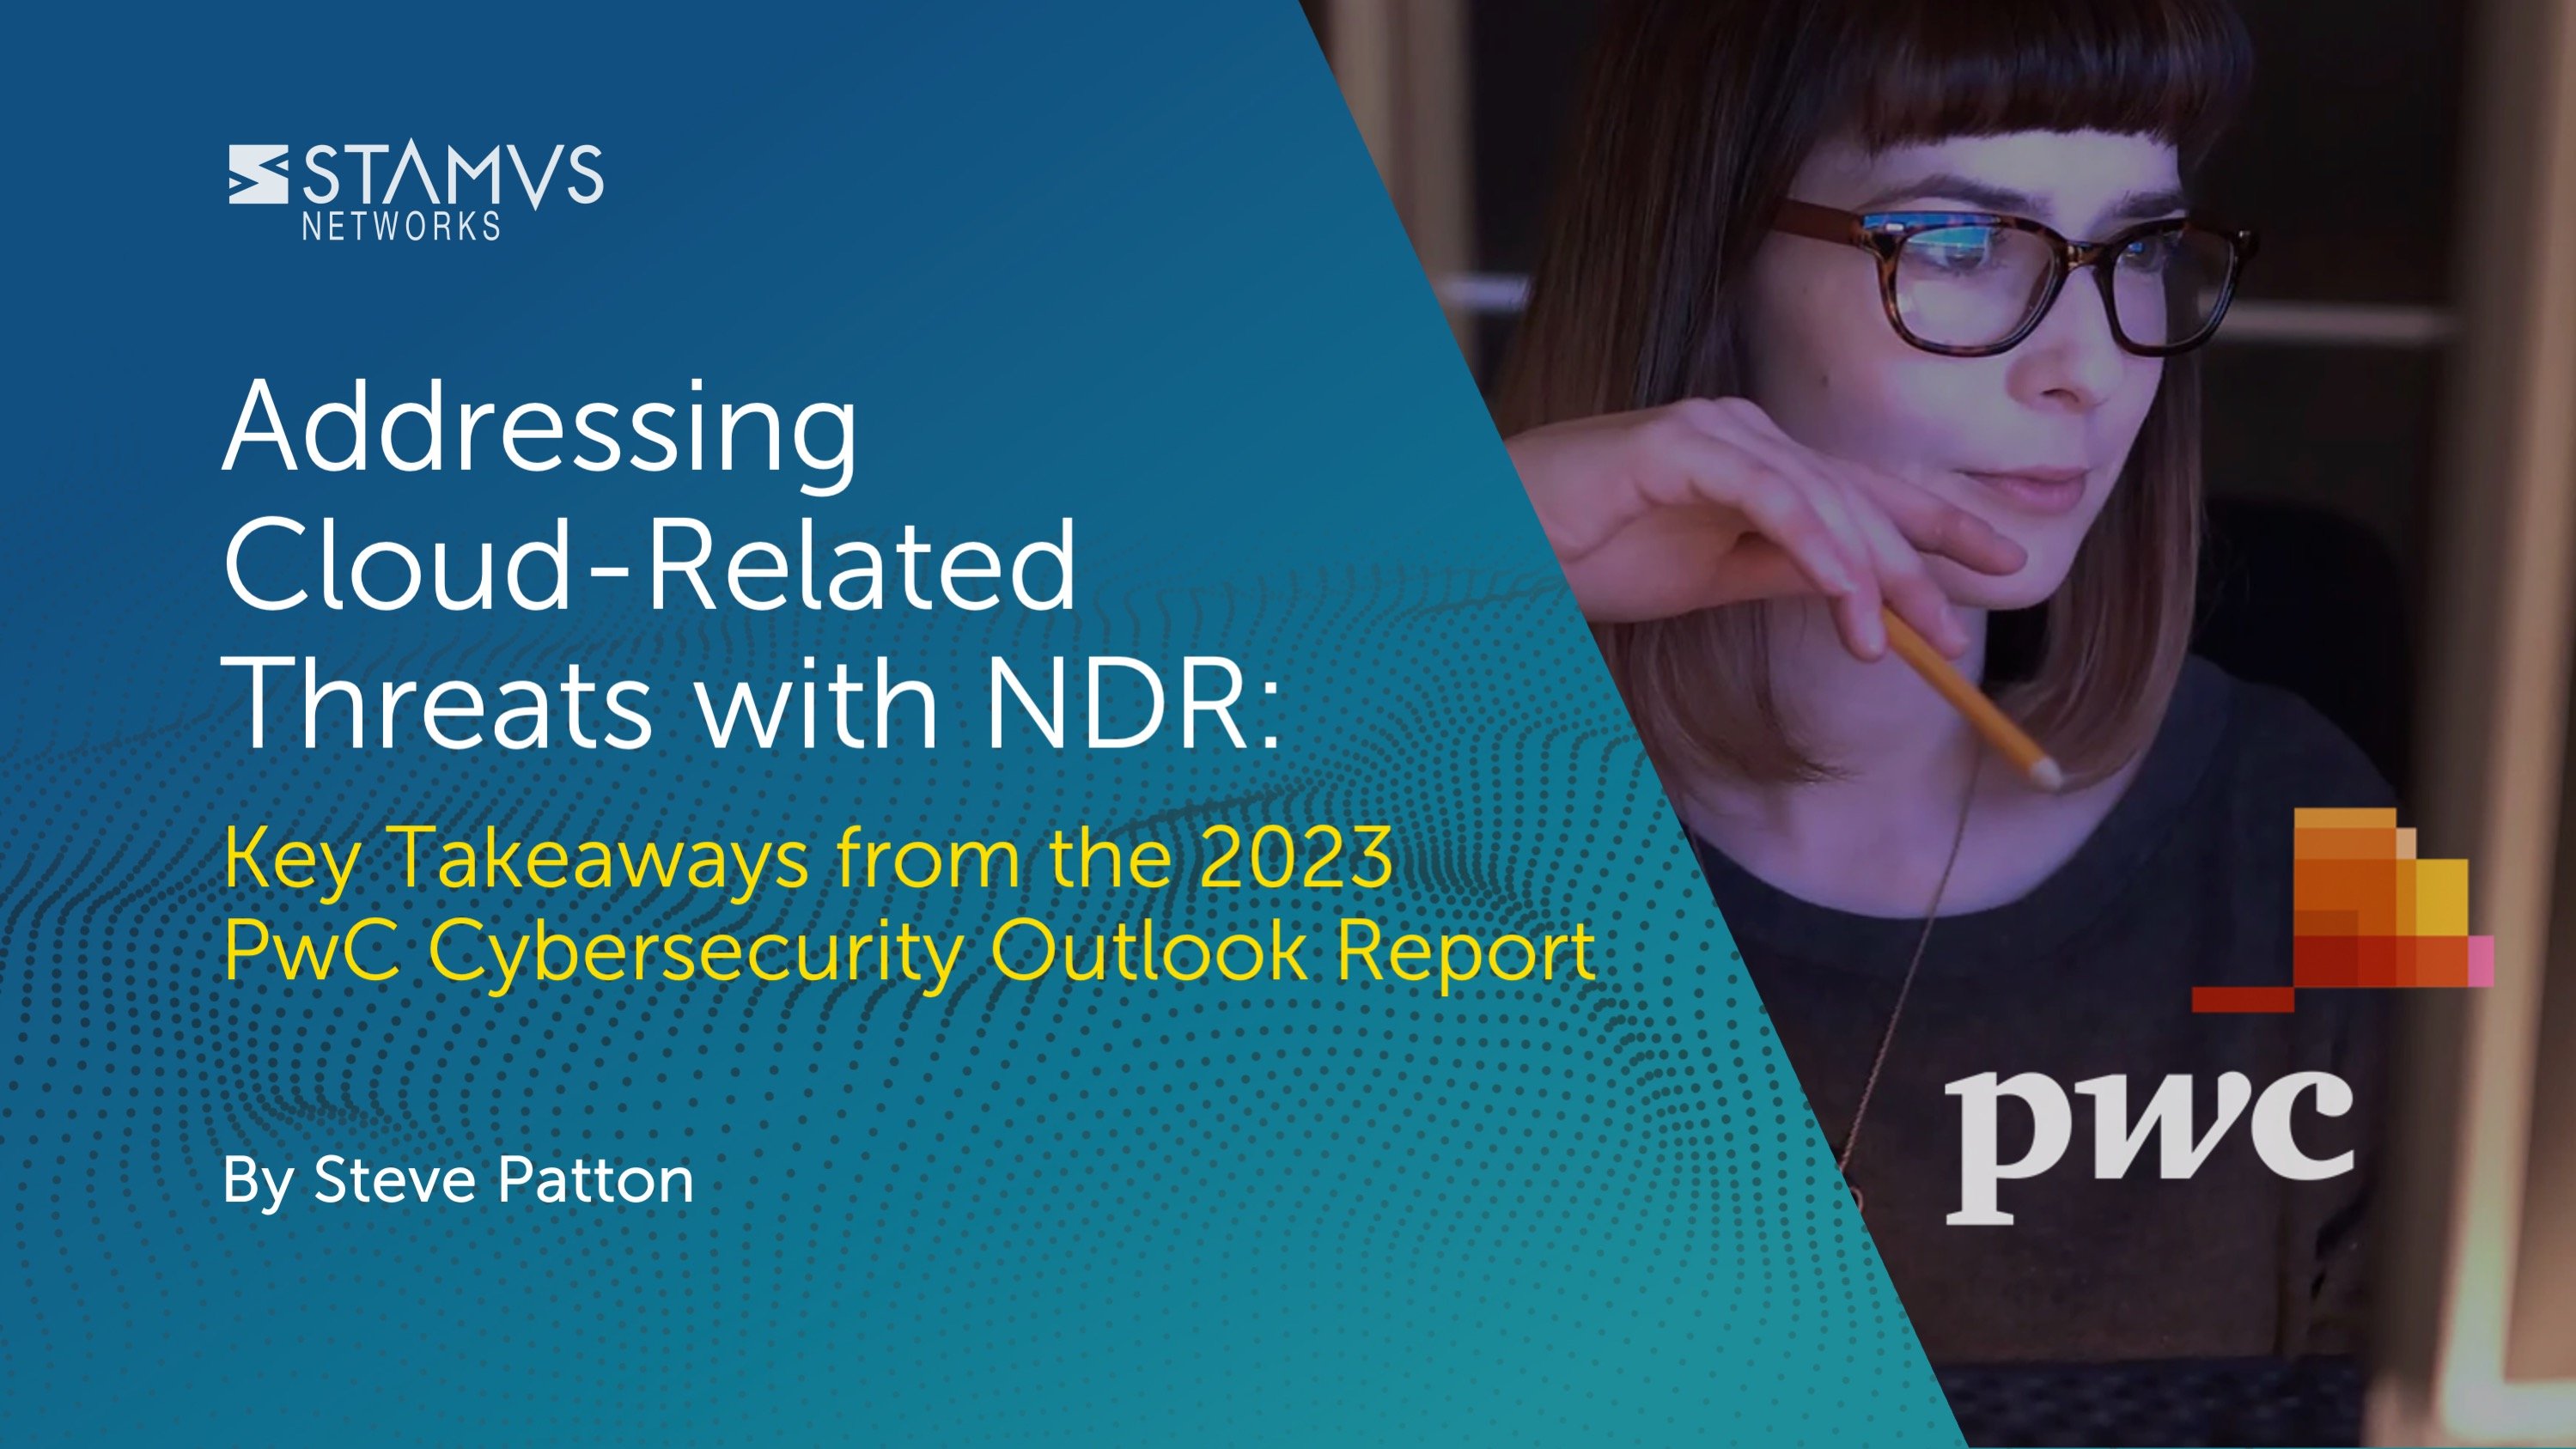 Addressing Cloud-Related Threats with NDR: Key Takeaways from the 2023 PwC Cybersecurity Outlook Report